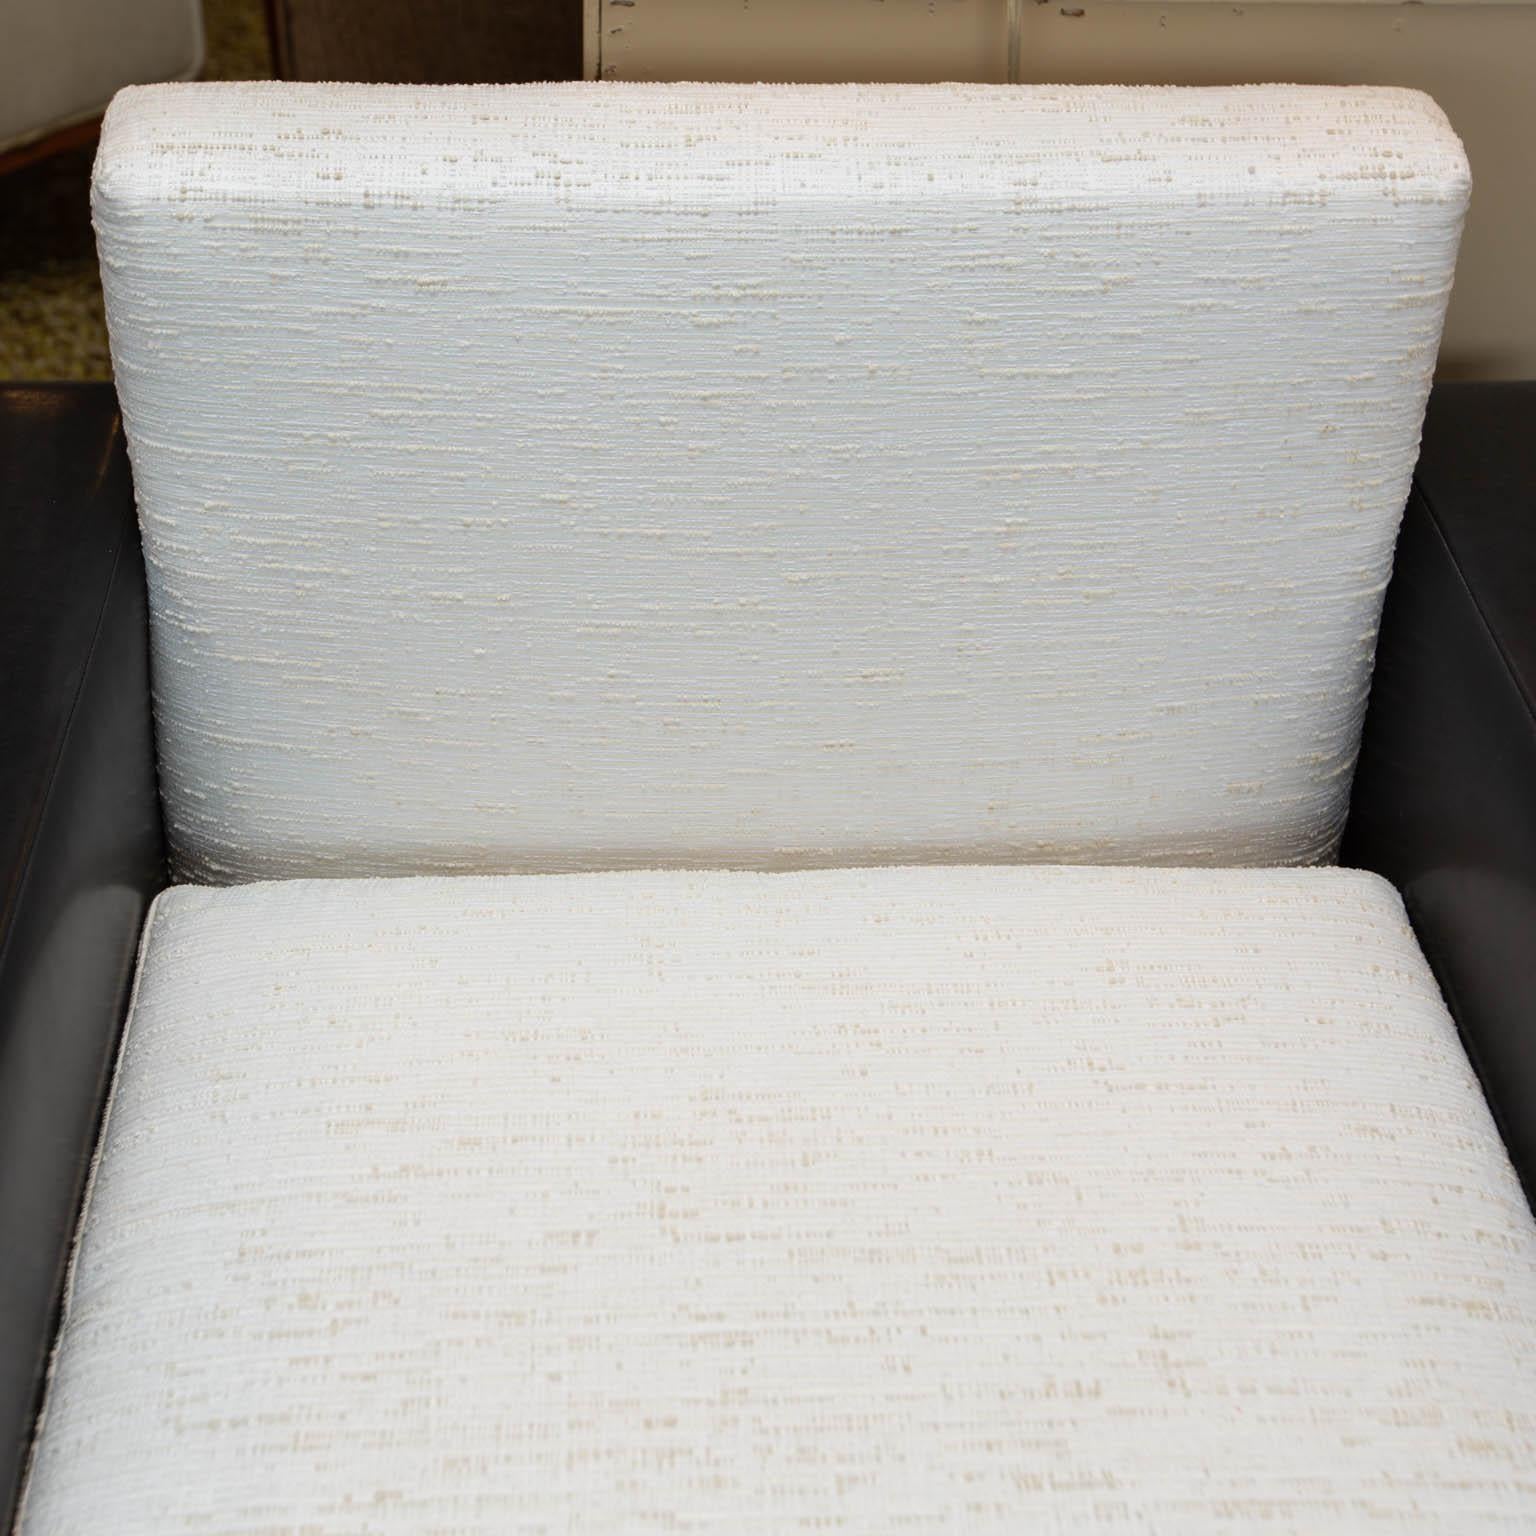 Custom made set of leather club chairs with cushions and backs upholstered in white raw silk. Great contrast that fits perfectly in today's monochromatic interiors. There are two sets available for a total of 4 chairs. Price is per pair.